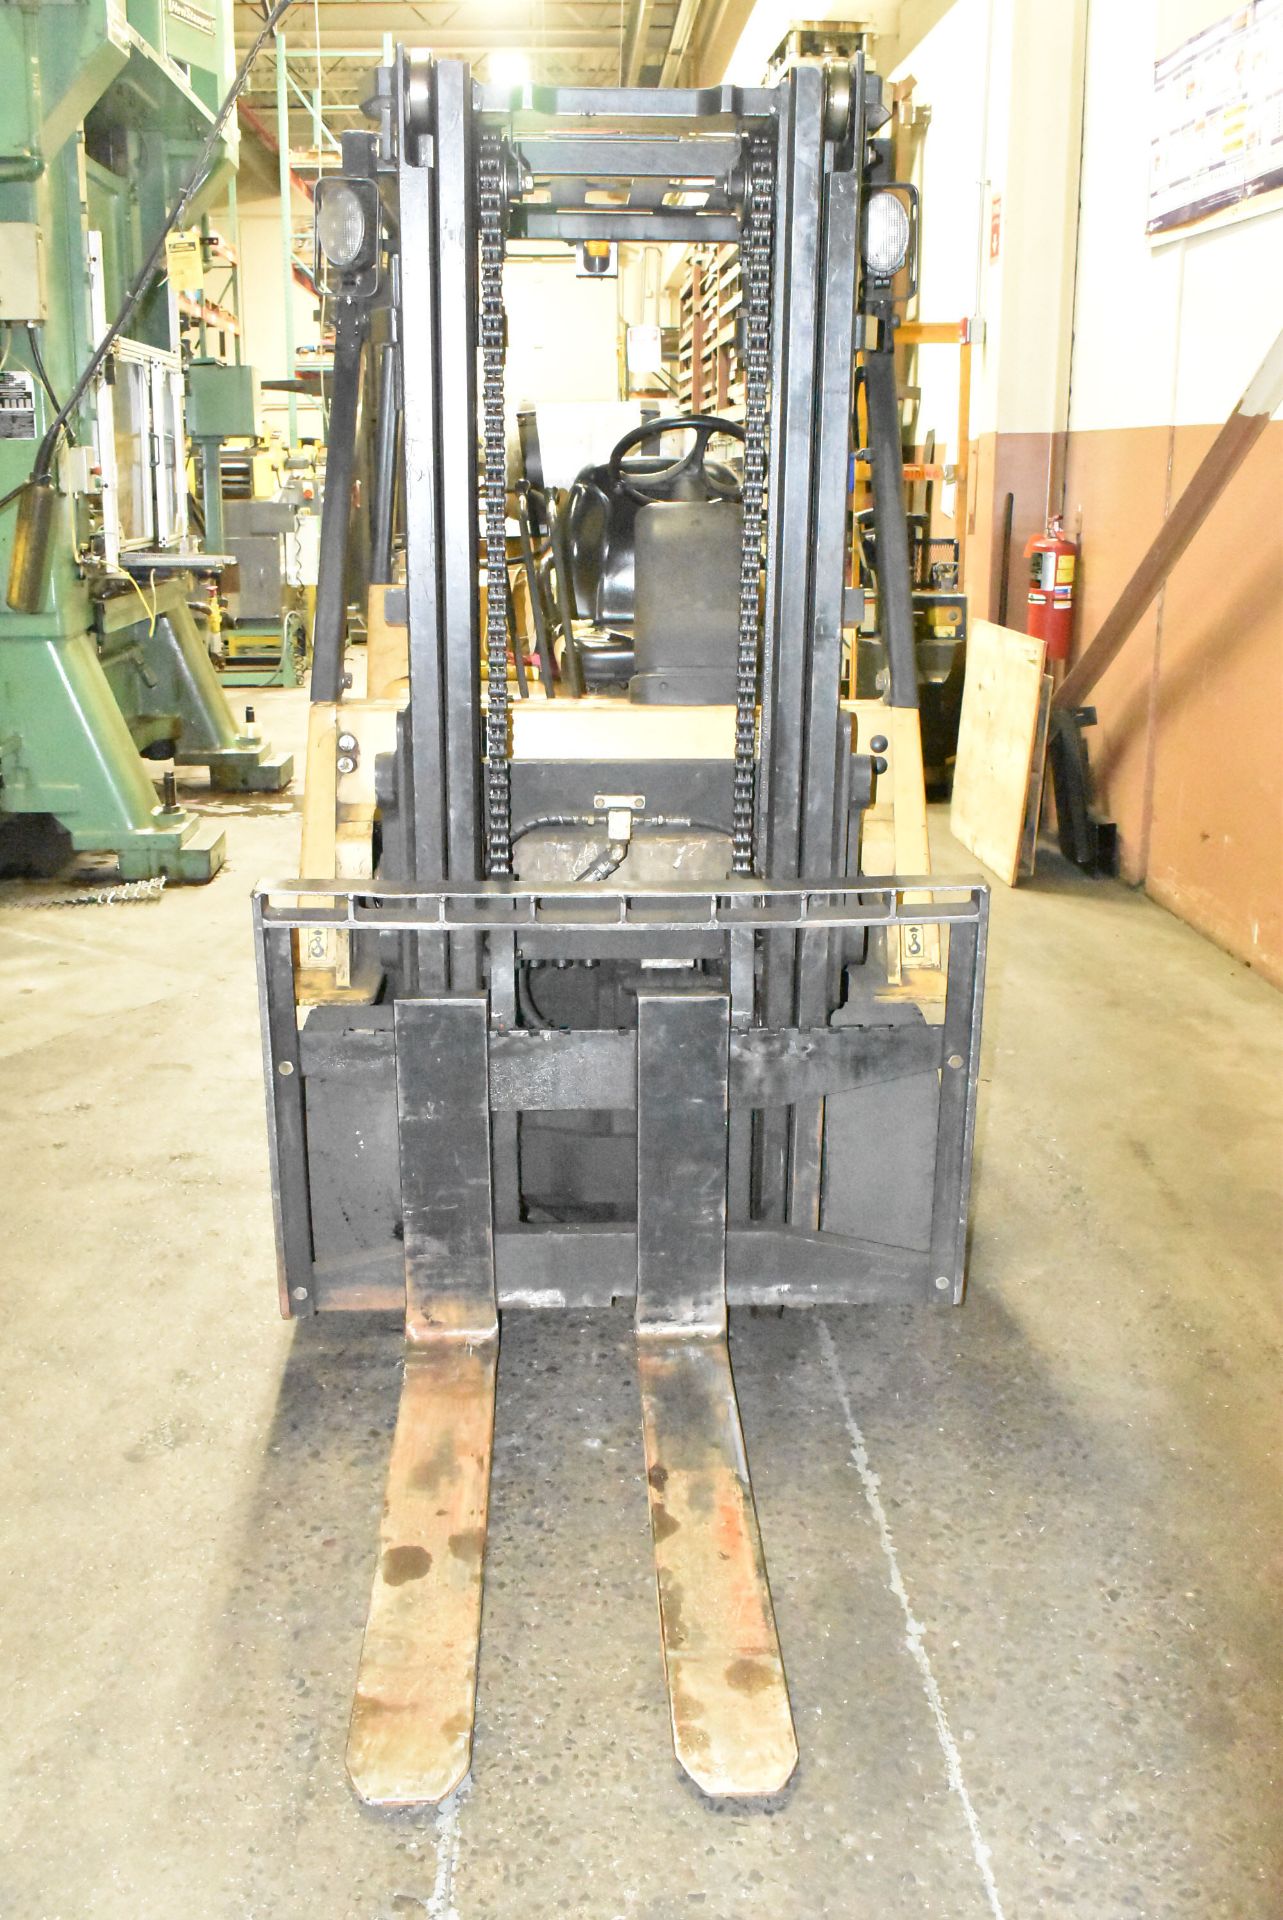 CATERPILLAR GC35K-LP 7,000 LB. LPG FORKLIFT WITH 120" MAX. LIFT HEIGHT, 2-STAGE MAST, SOLID TIRES, - Image 2 of 9